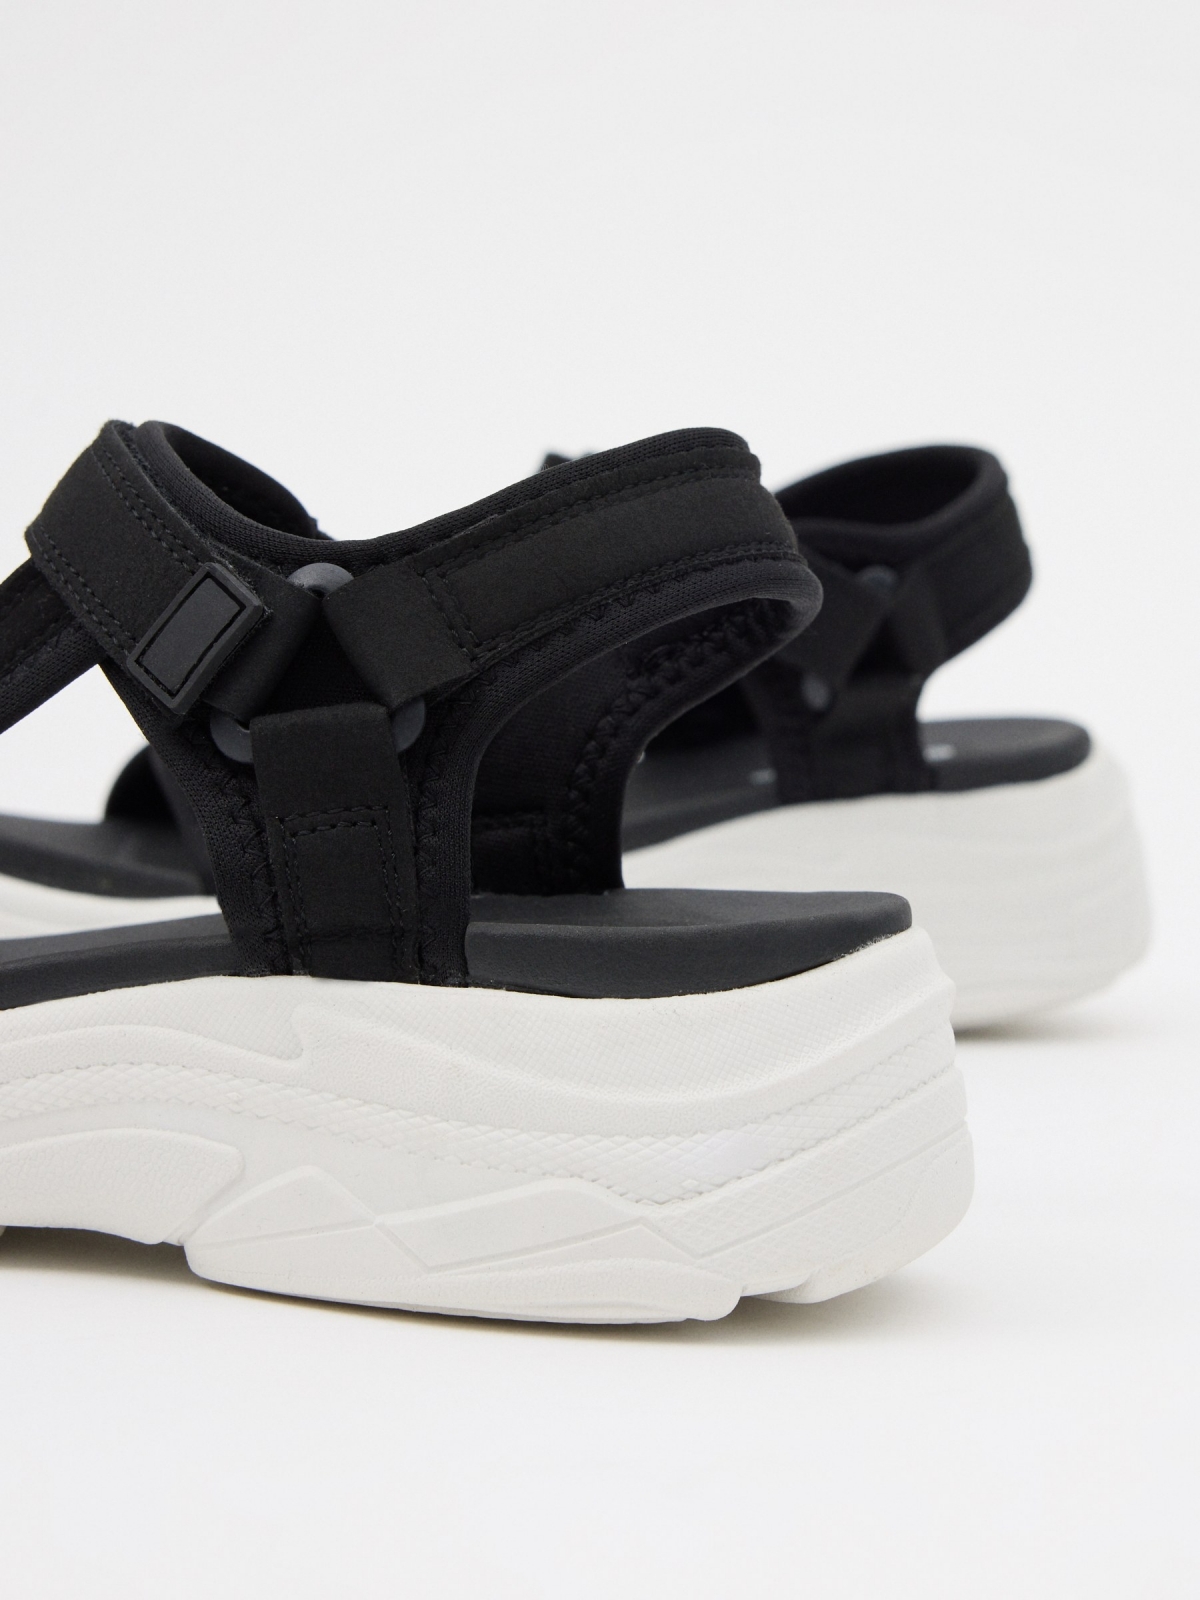 Sports sandal with volume sole black detail view